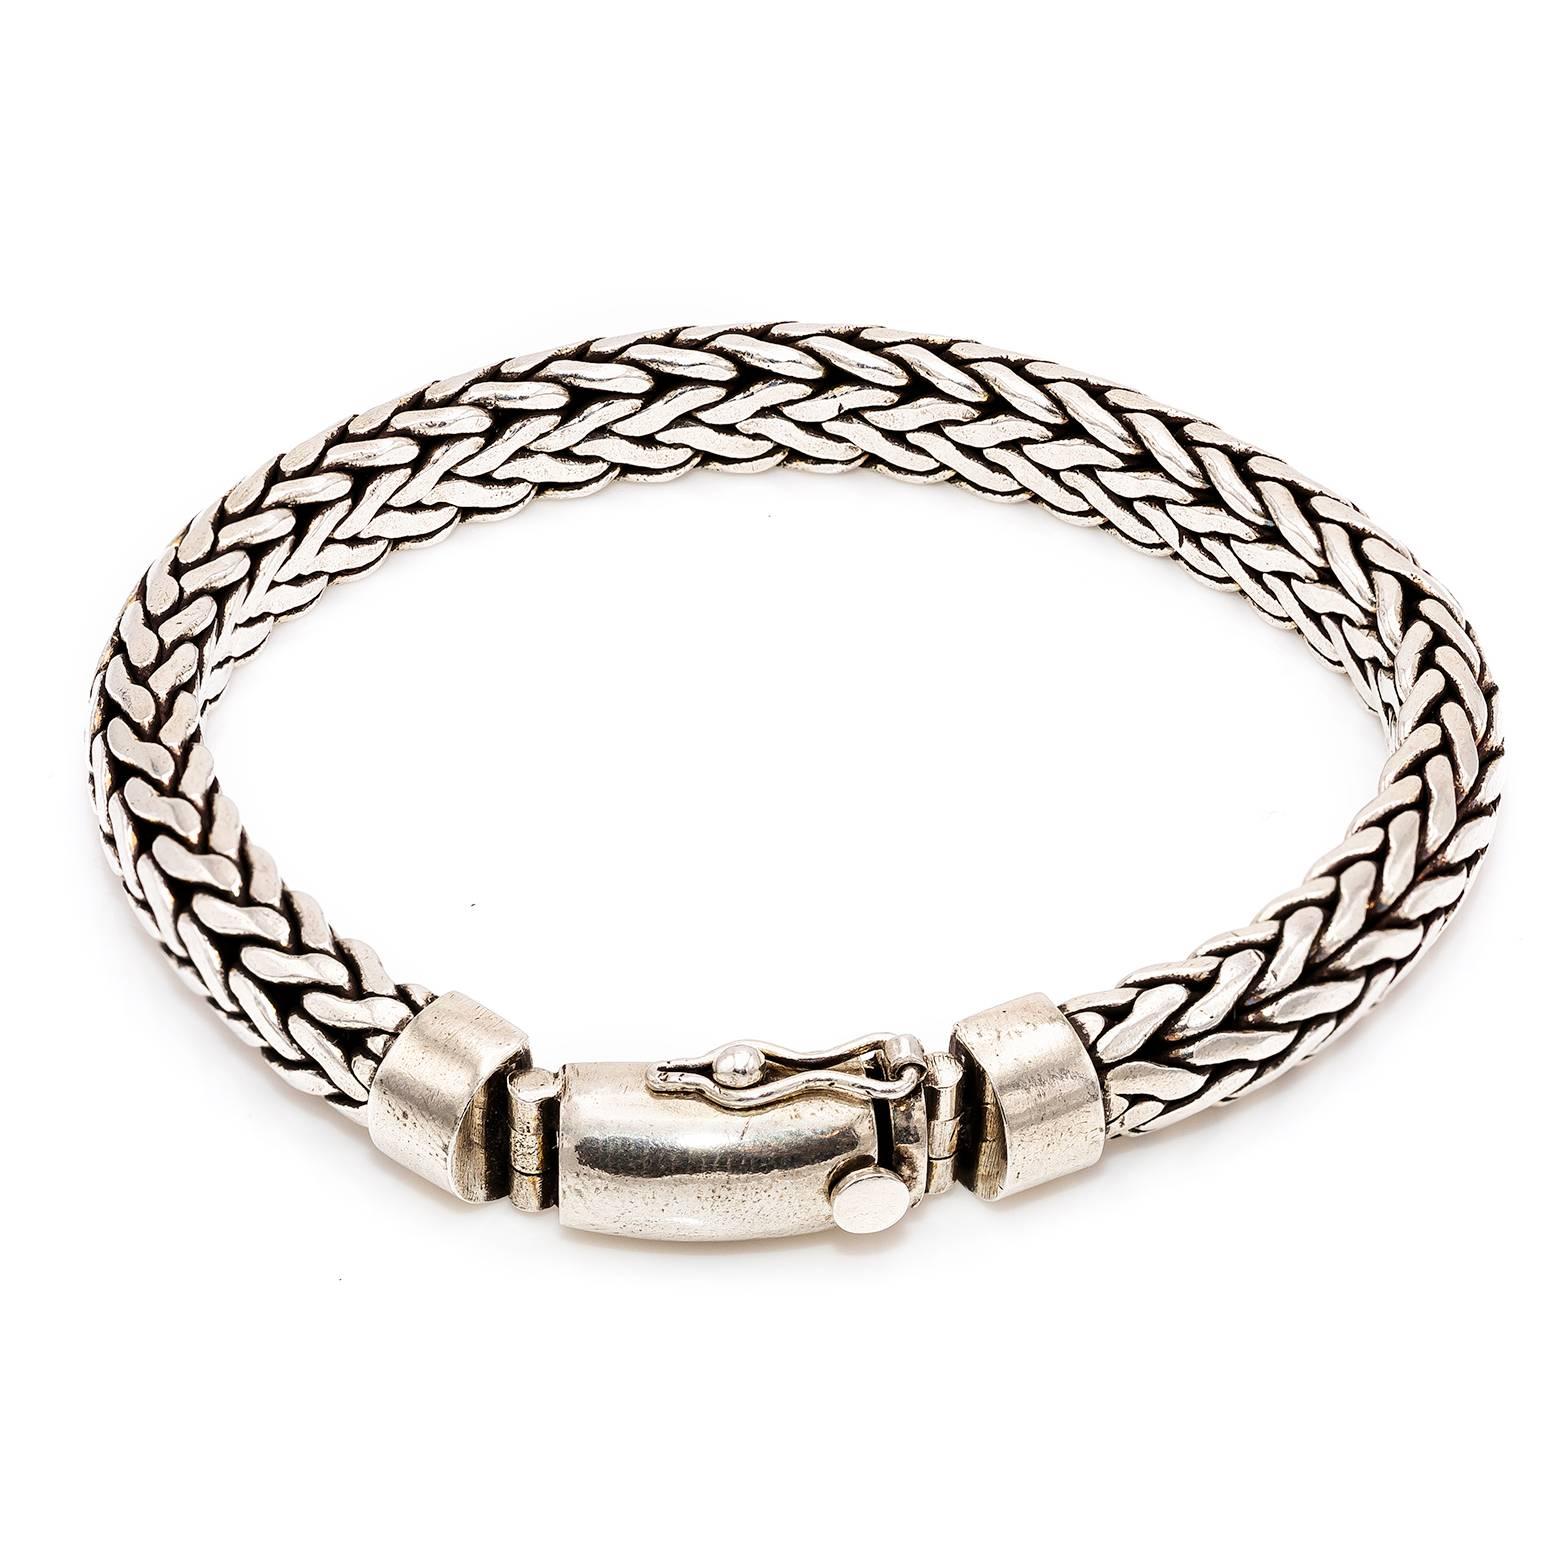 This woven sterling silver bracelet is comfortable and substantial. Oxidized in the creases, the contrasting black with bright sterling silver create a dynamic artistic look. 